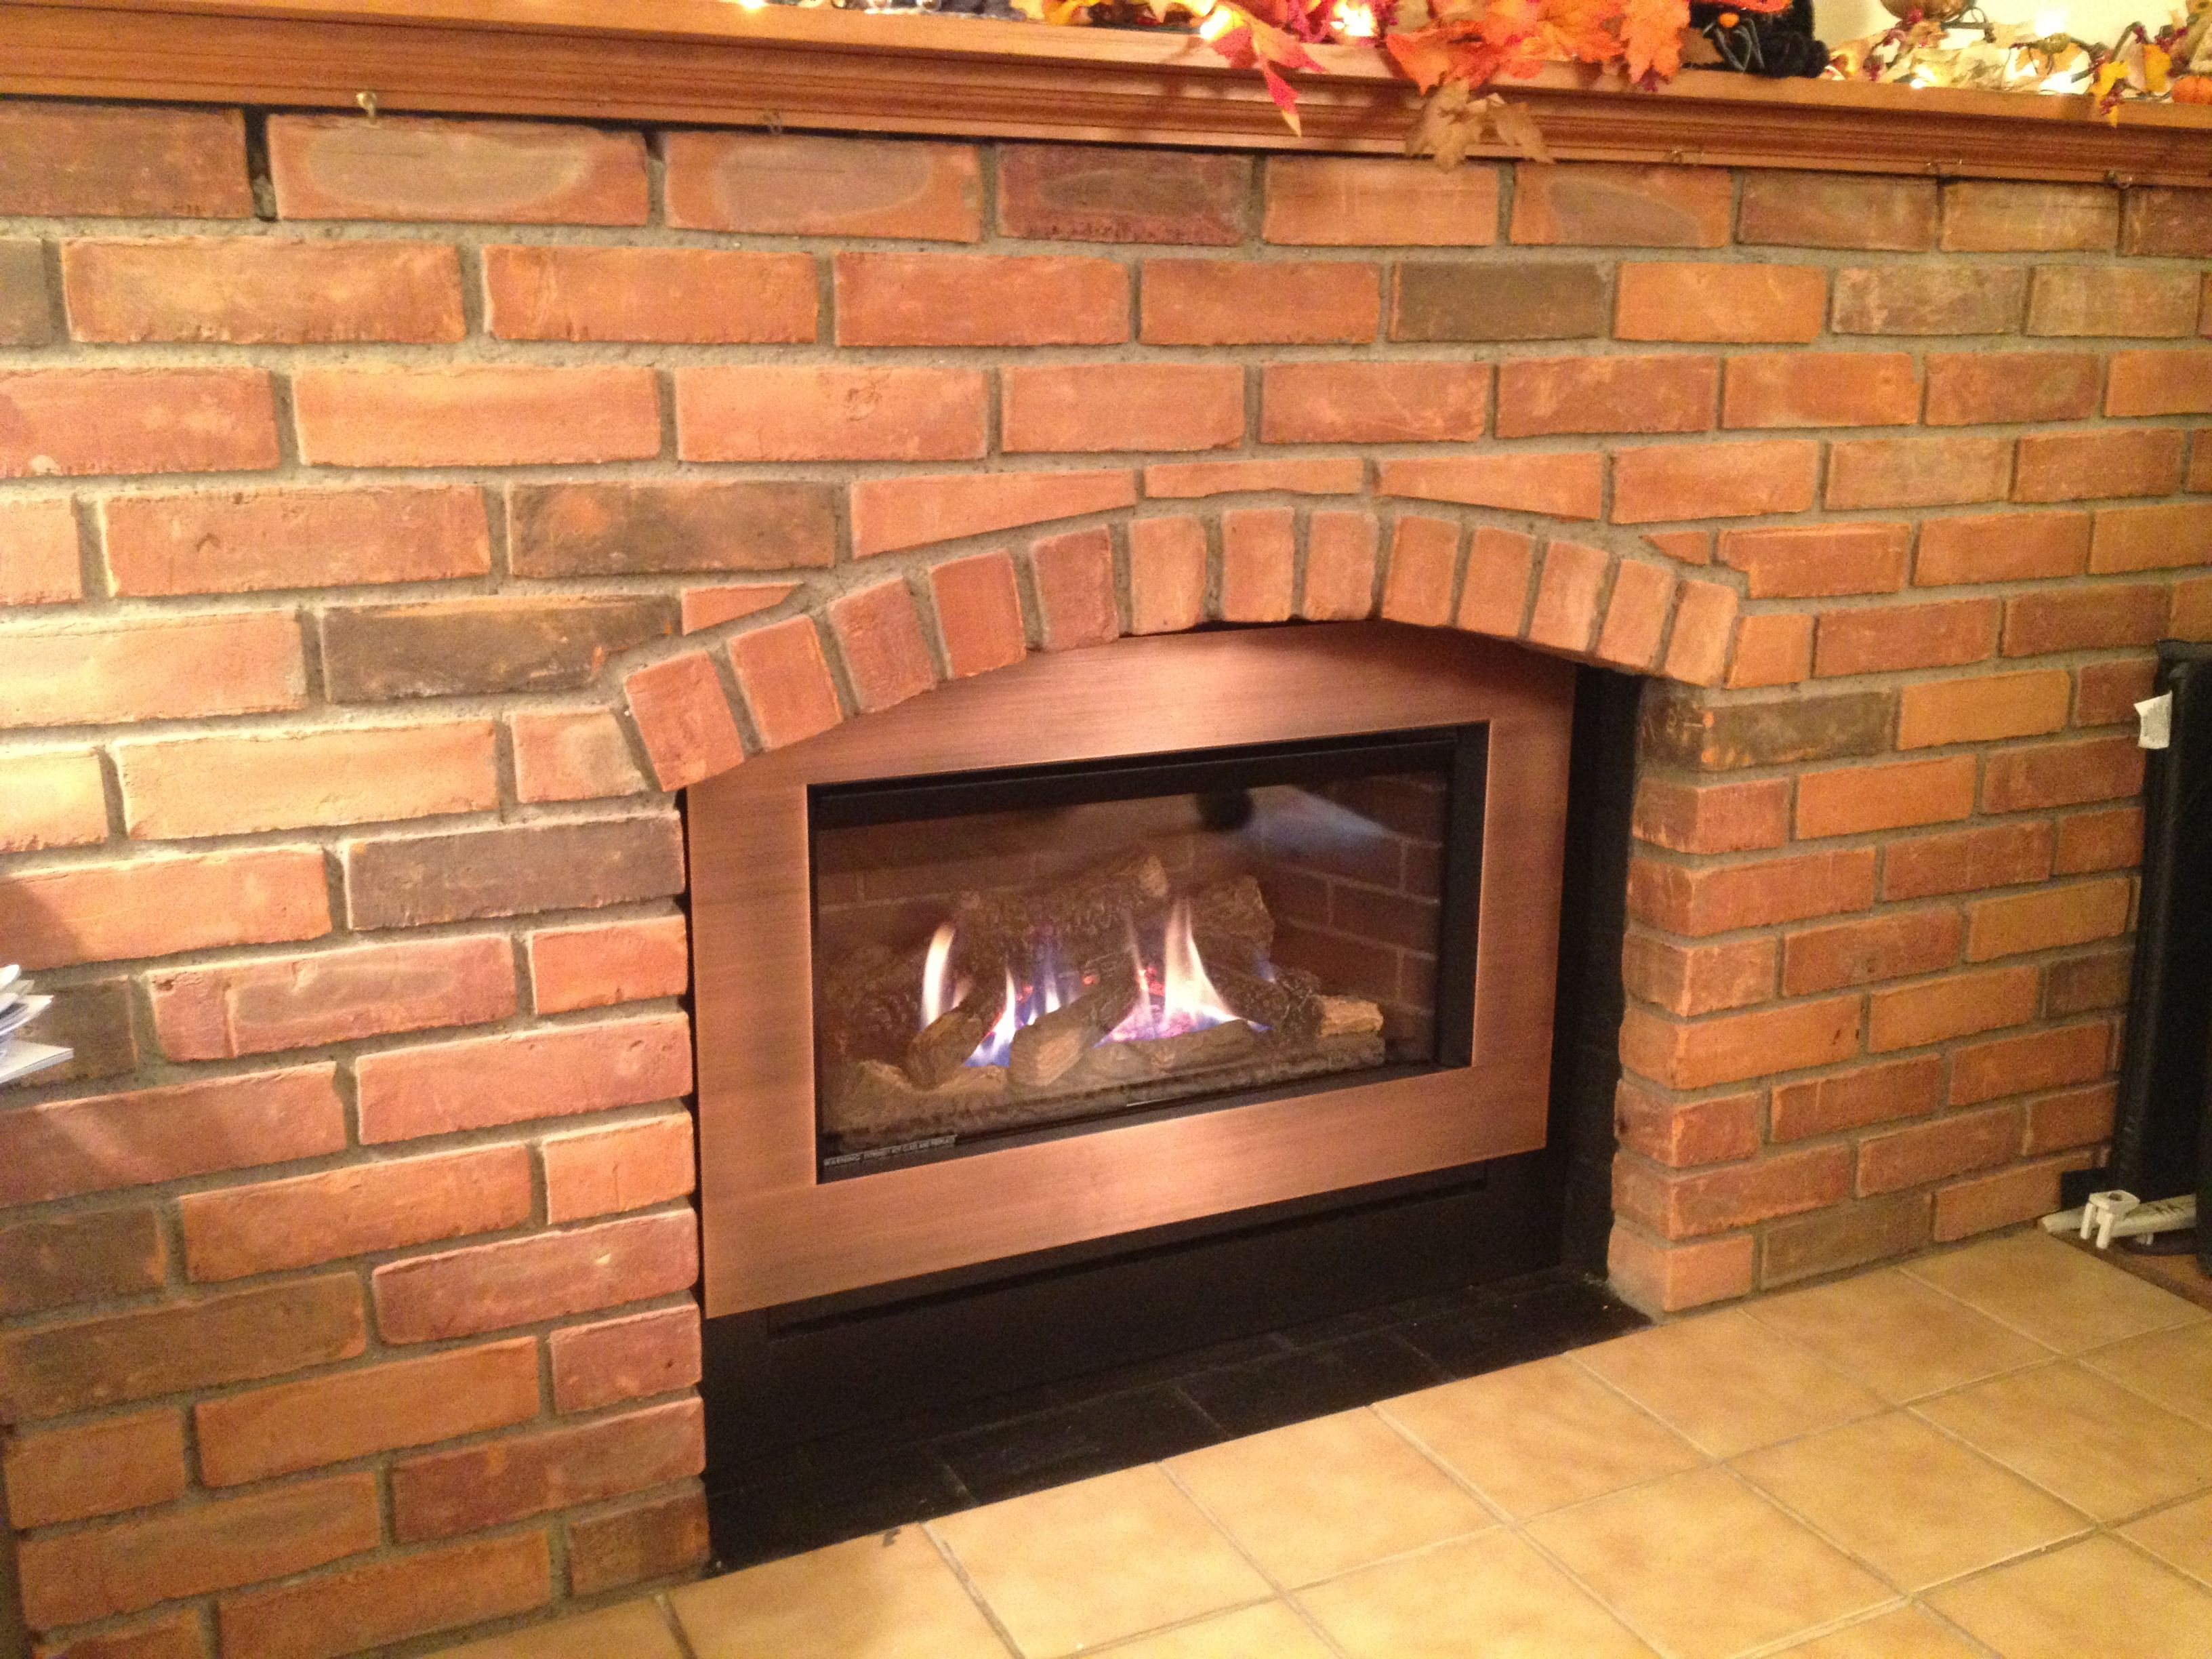 Corner Gas Fireplaces for Sale Luxury Pin On Valor Radiant Gas Fireplaces Midwest Dealer